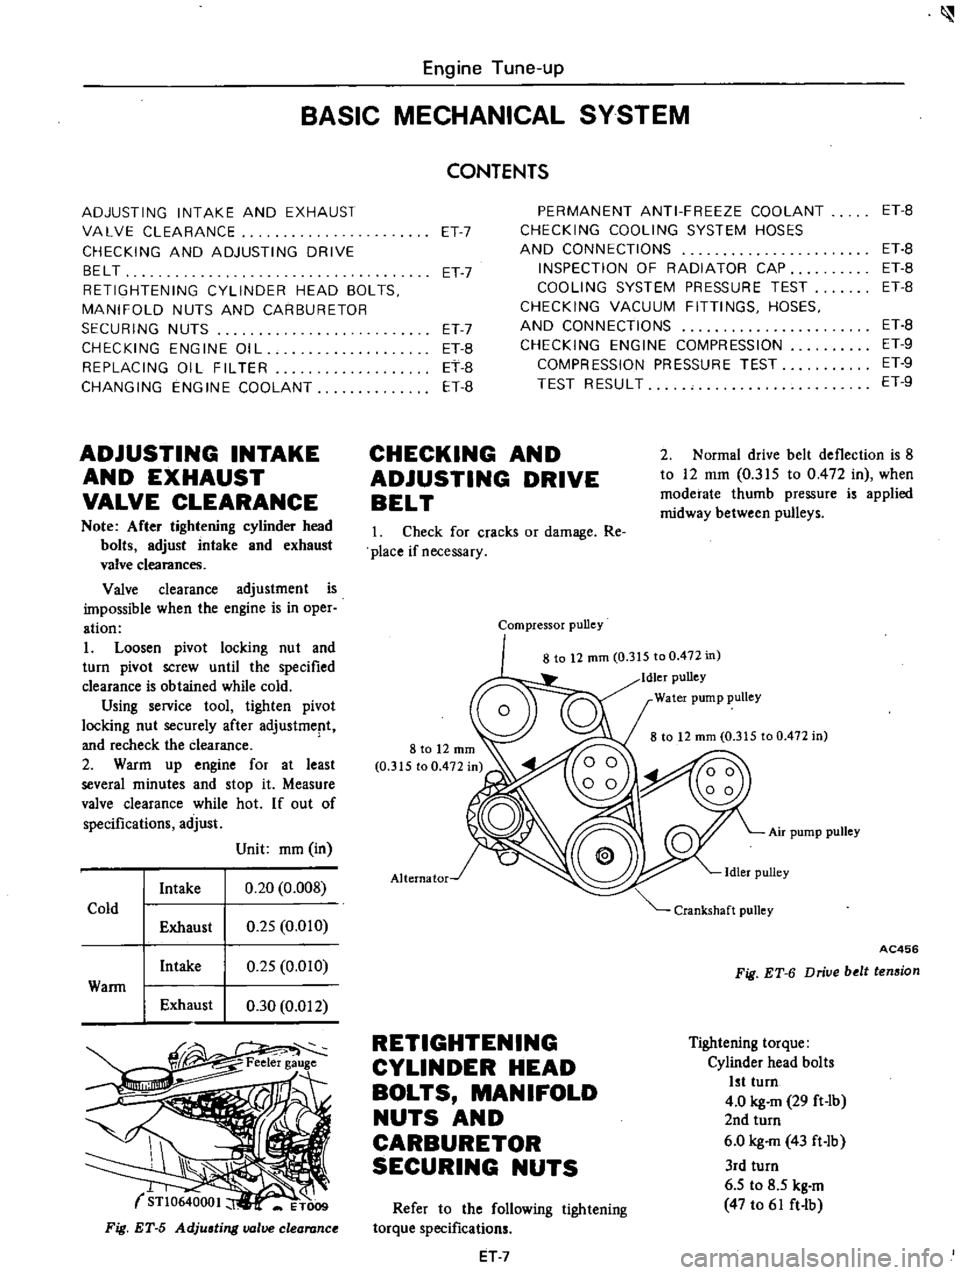 DATSUN PICK-UP 1977 User Guide 
Engine 
Tune

up

BASIC 
MECHANICAL 
SYSTEM

ADJUSTING 
INTAKE 
AND 
EXHAUST

VALVE 
CLEARANCE

CHECKING 
AND

ADJUSTING 
DRIVE

BELT

RETIGHTENING 
CYLINDER 
HEAD 
BOLTS

MANIFOLD 
NUTS 
AND 
CARBUR